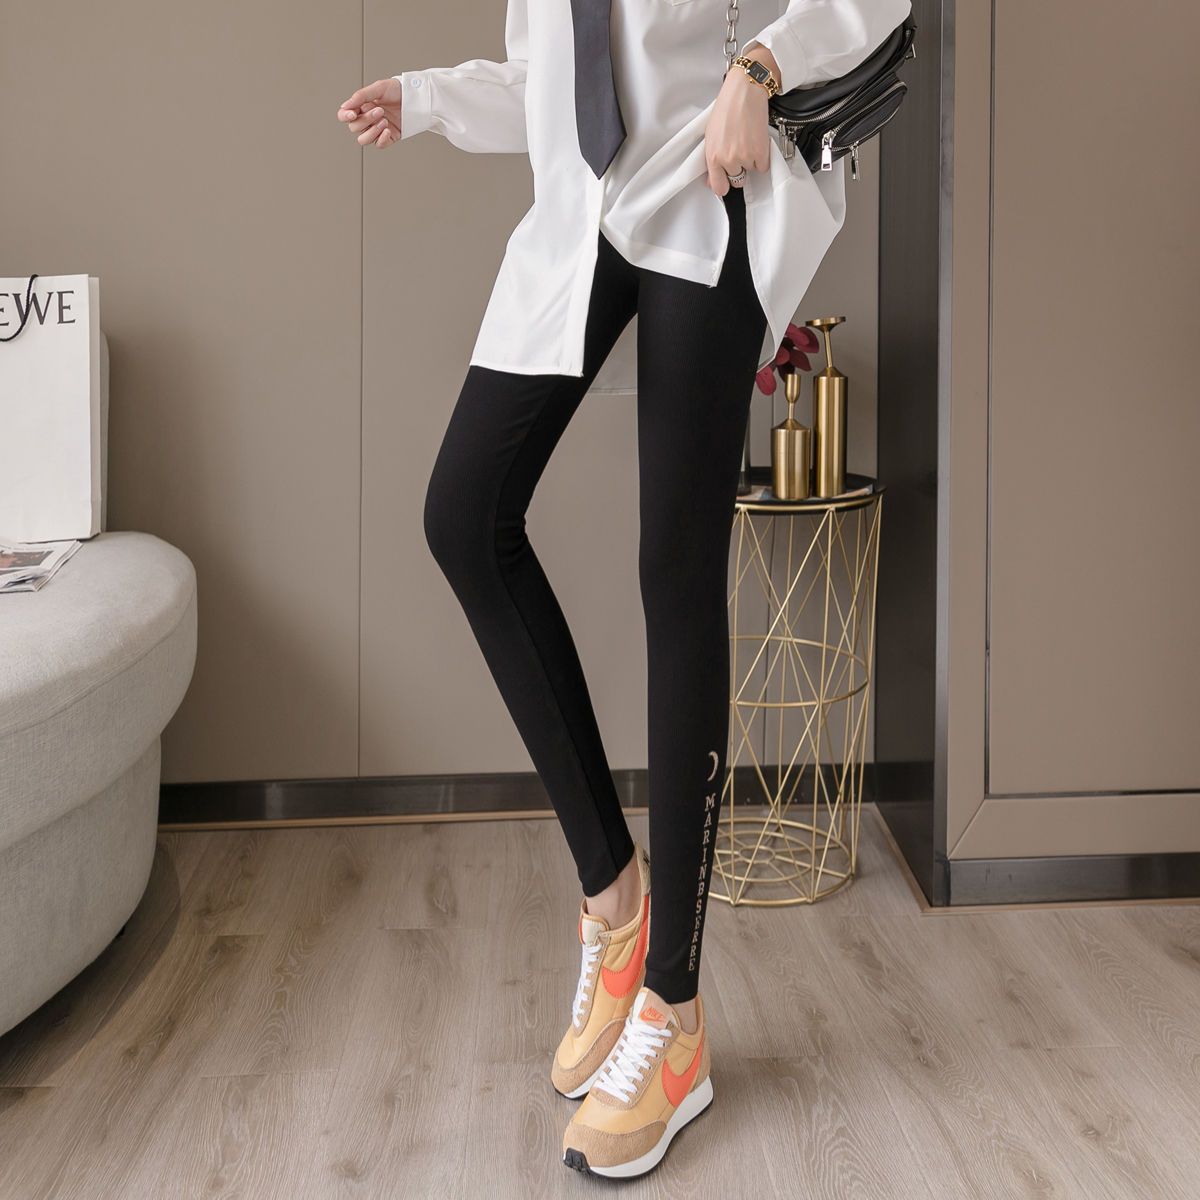 2023 new leggings women's outerwear gray thin threaded pants vertical stripes spring and autumn winter high waist tight large size